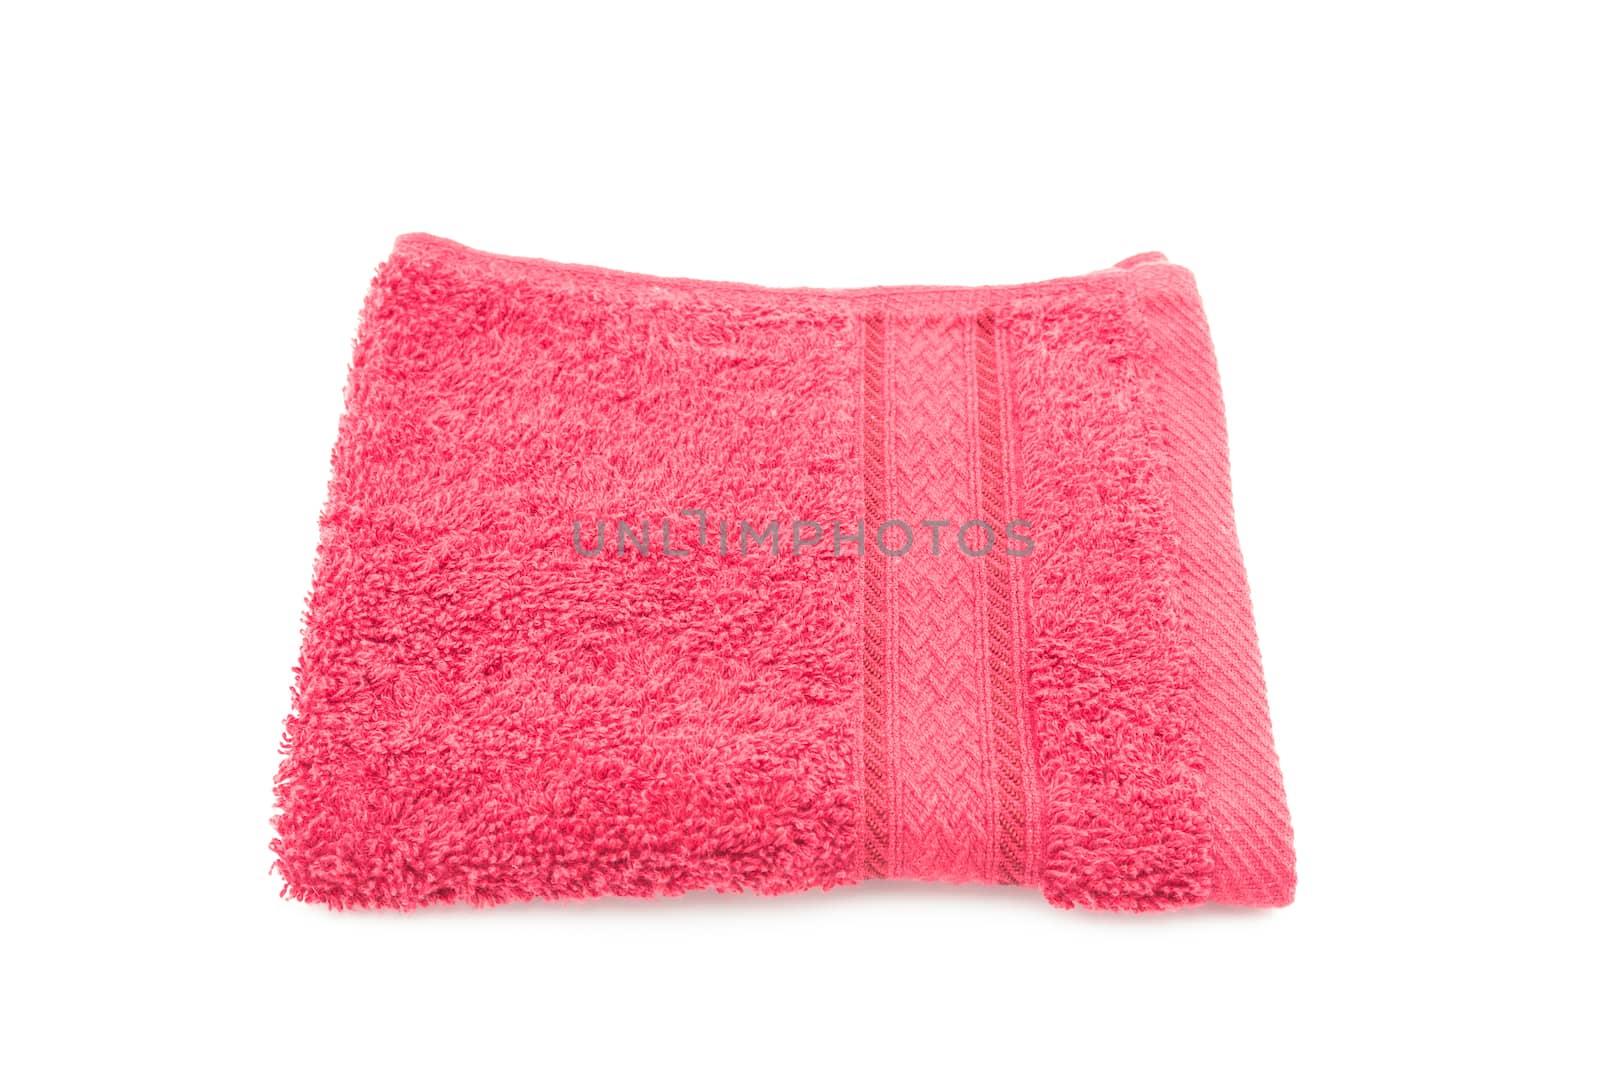 Red towel on a white background